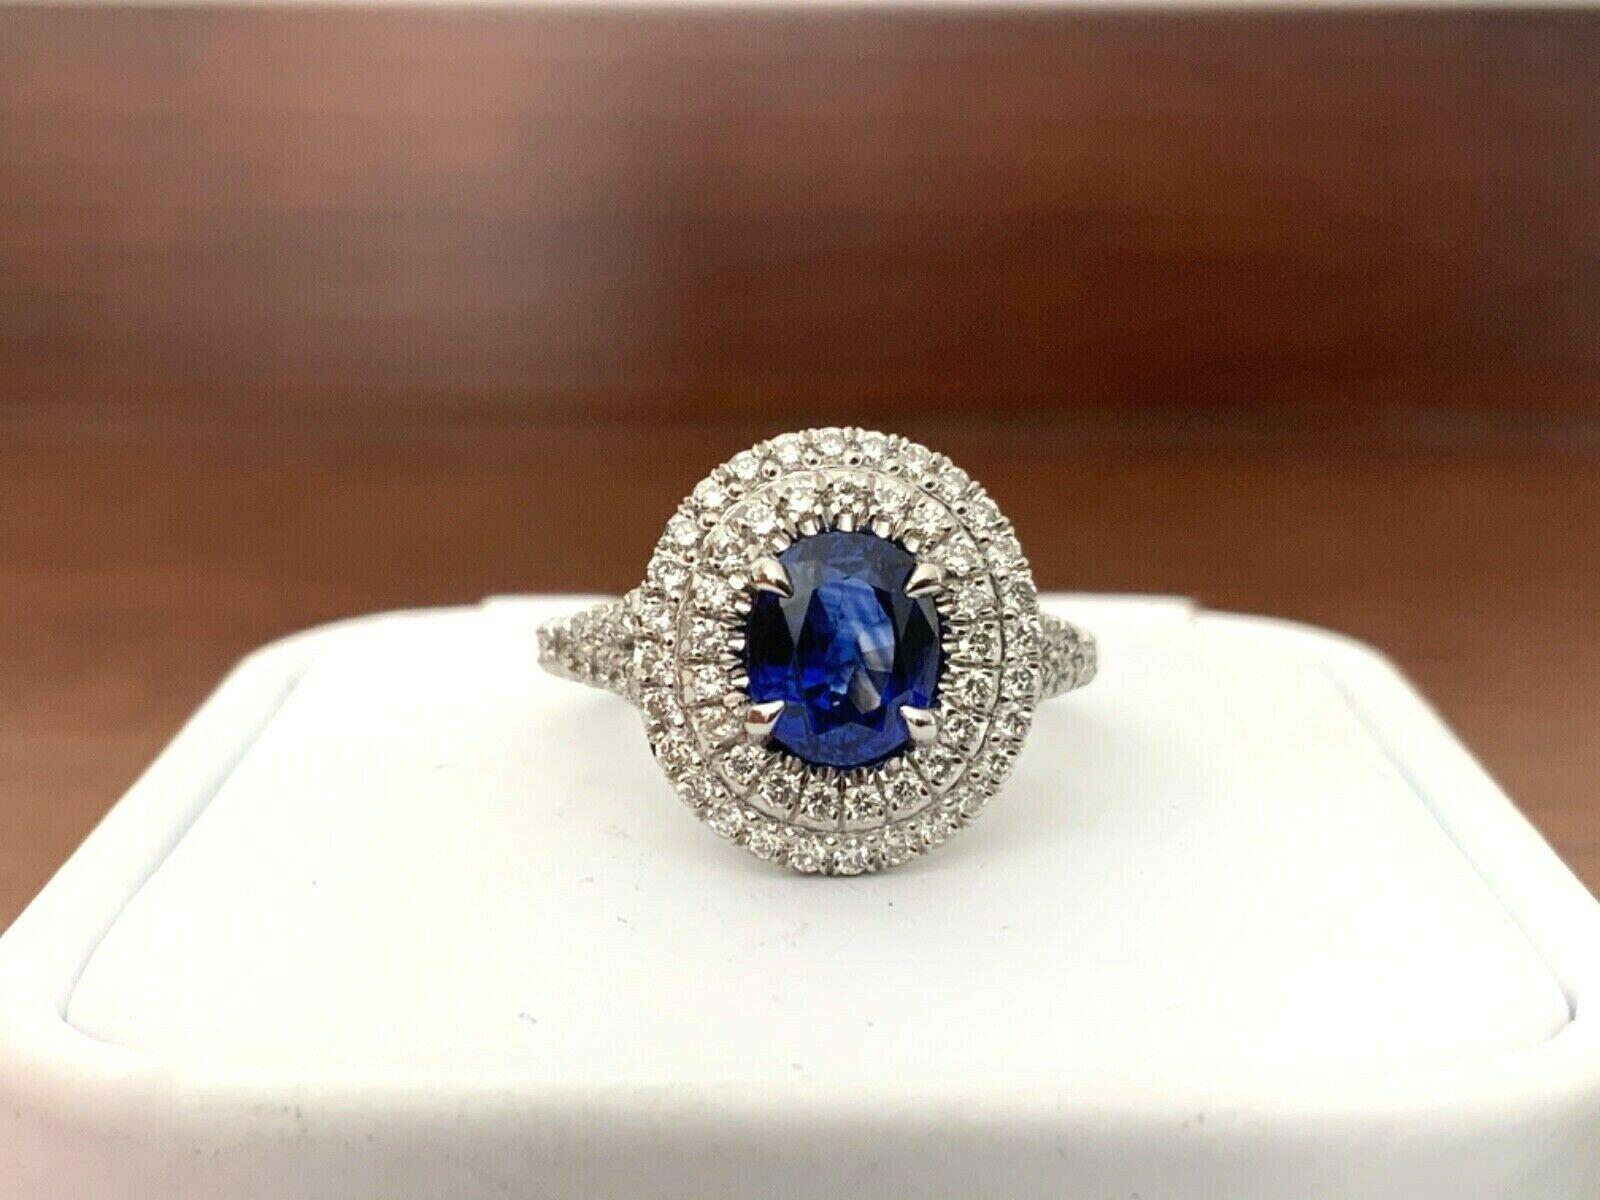 Oval Cut 1.65 Carat Natural Royal Blue Madagascar Sapphire and Diamond Ring GIA Certified For Sale